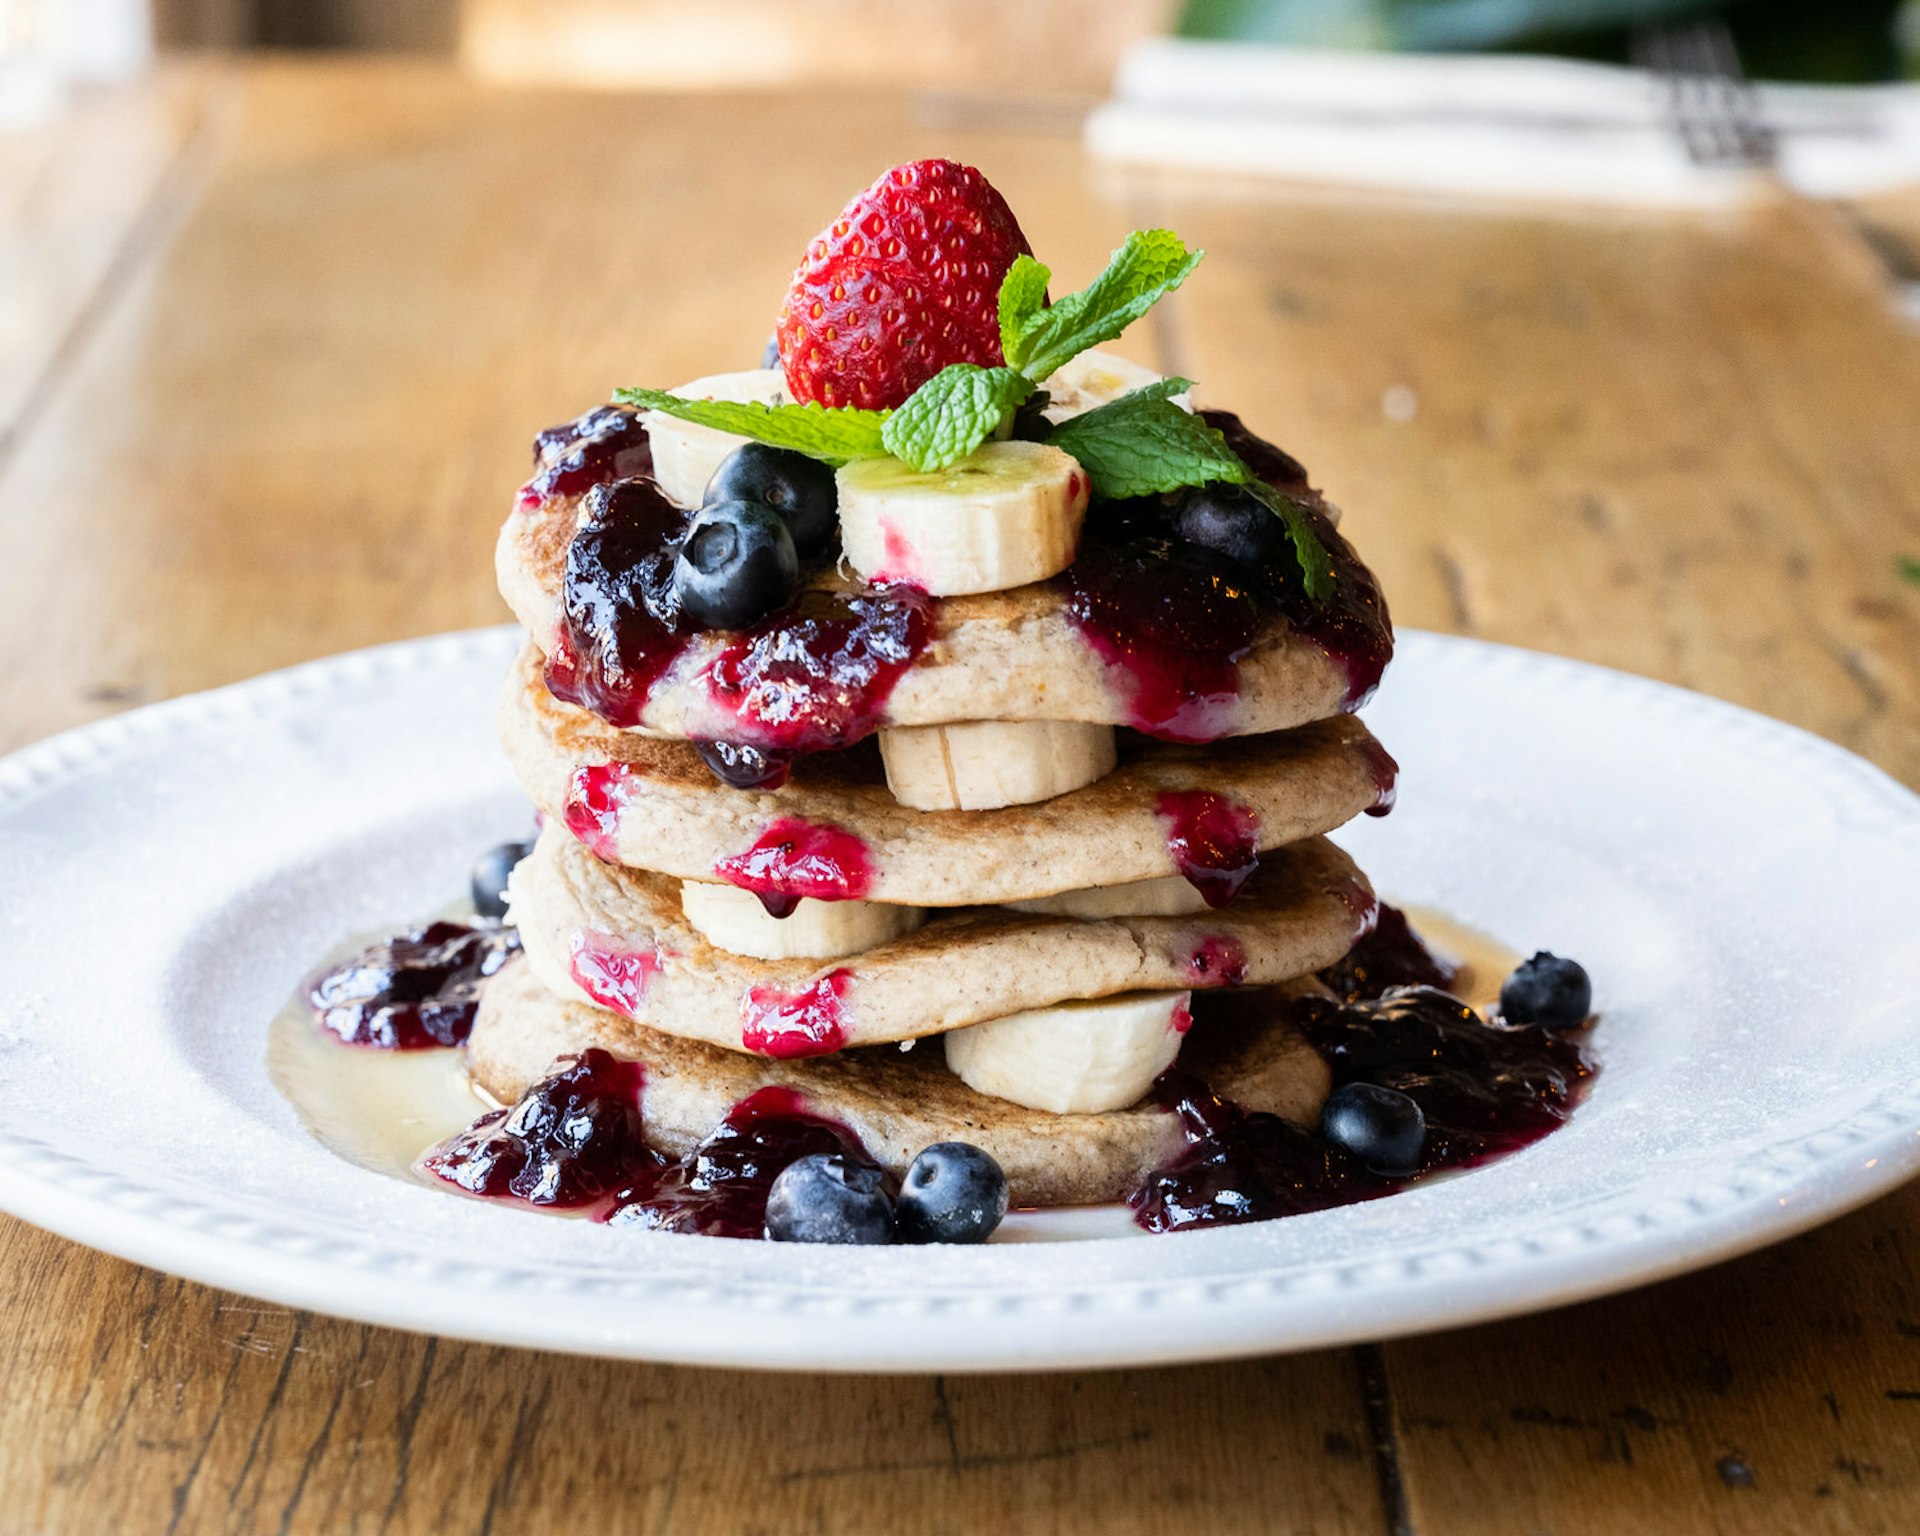 A huge stack of vegan pancakes at the Miranda Cafe, served with bananas, blueberries and a red compote, on a white plate dusted with icing sugar.